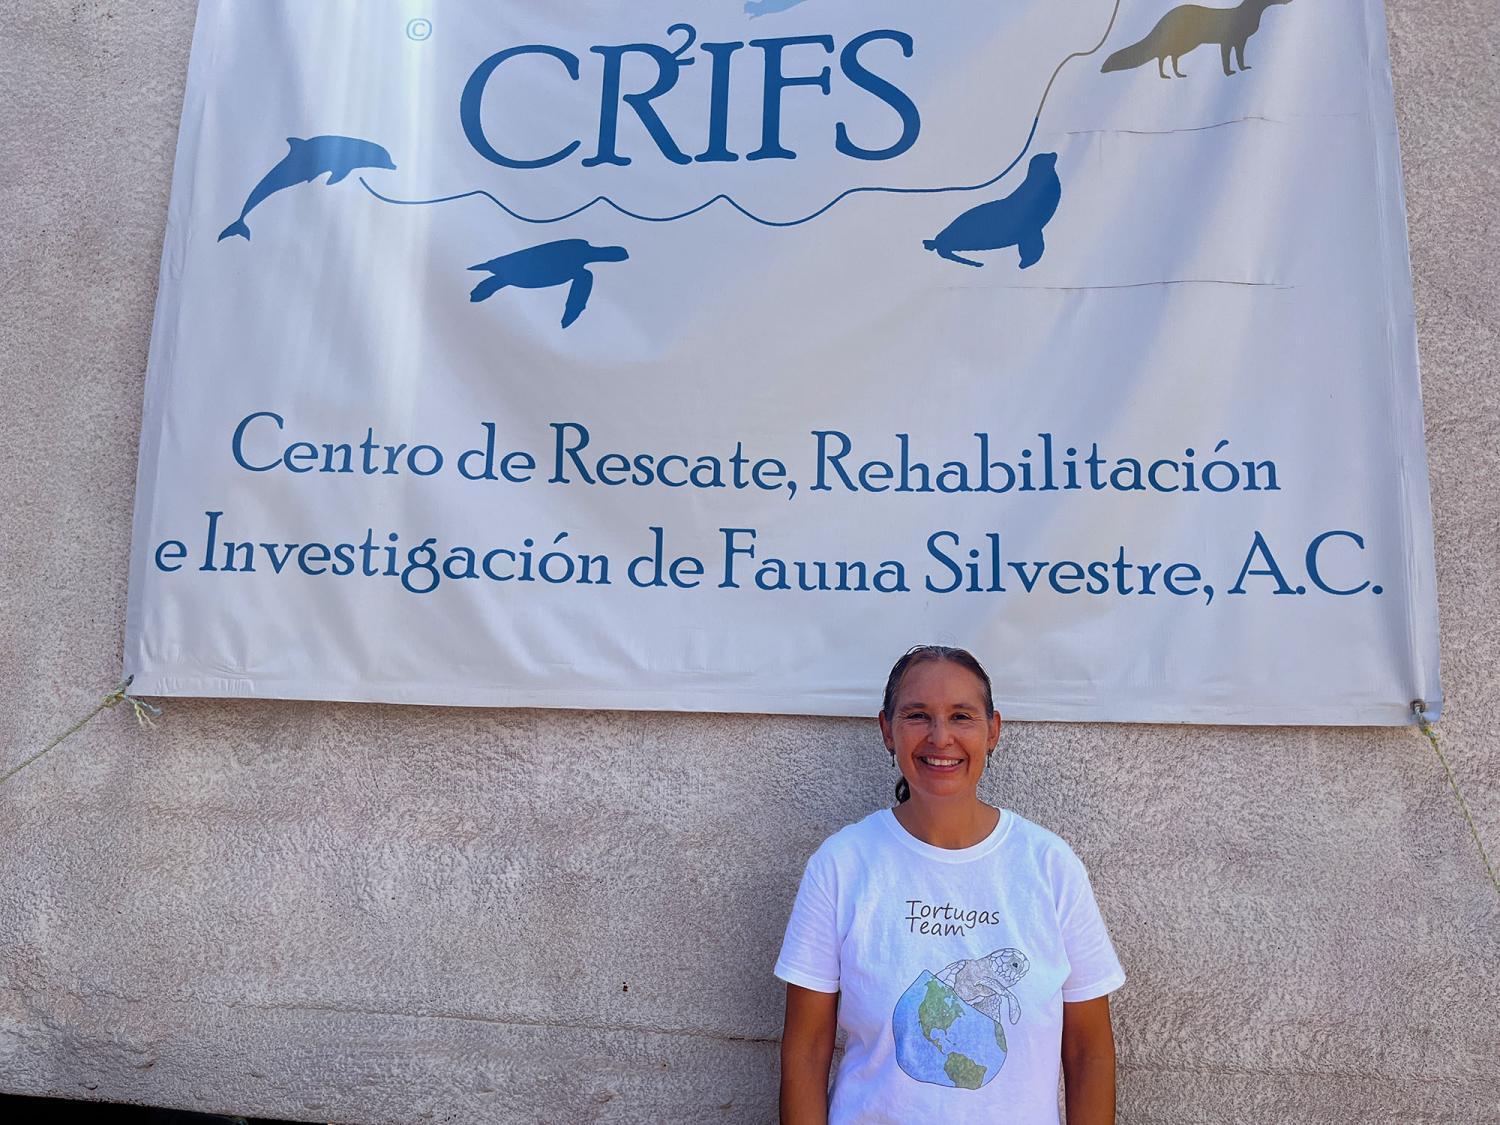 Elsa Coria Galindo is the co-founder and director of CRRIFS.